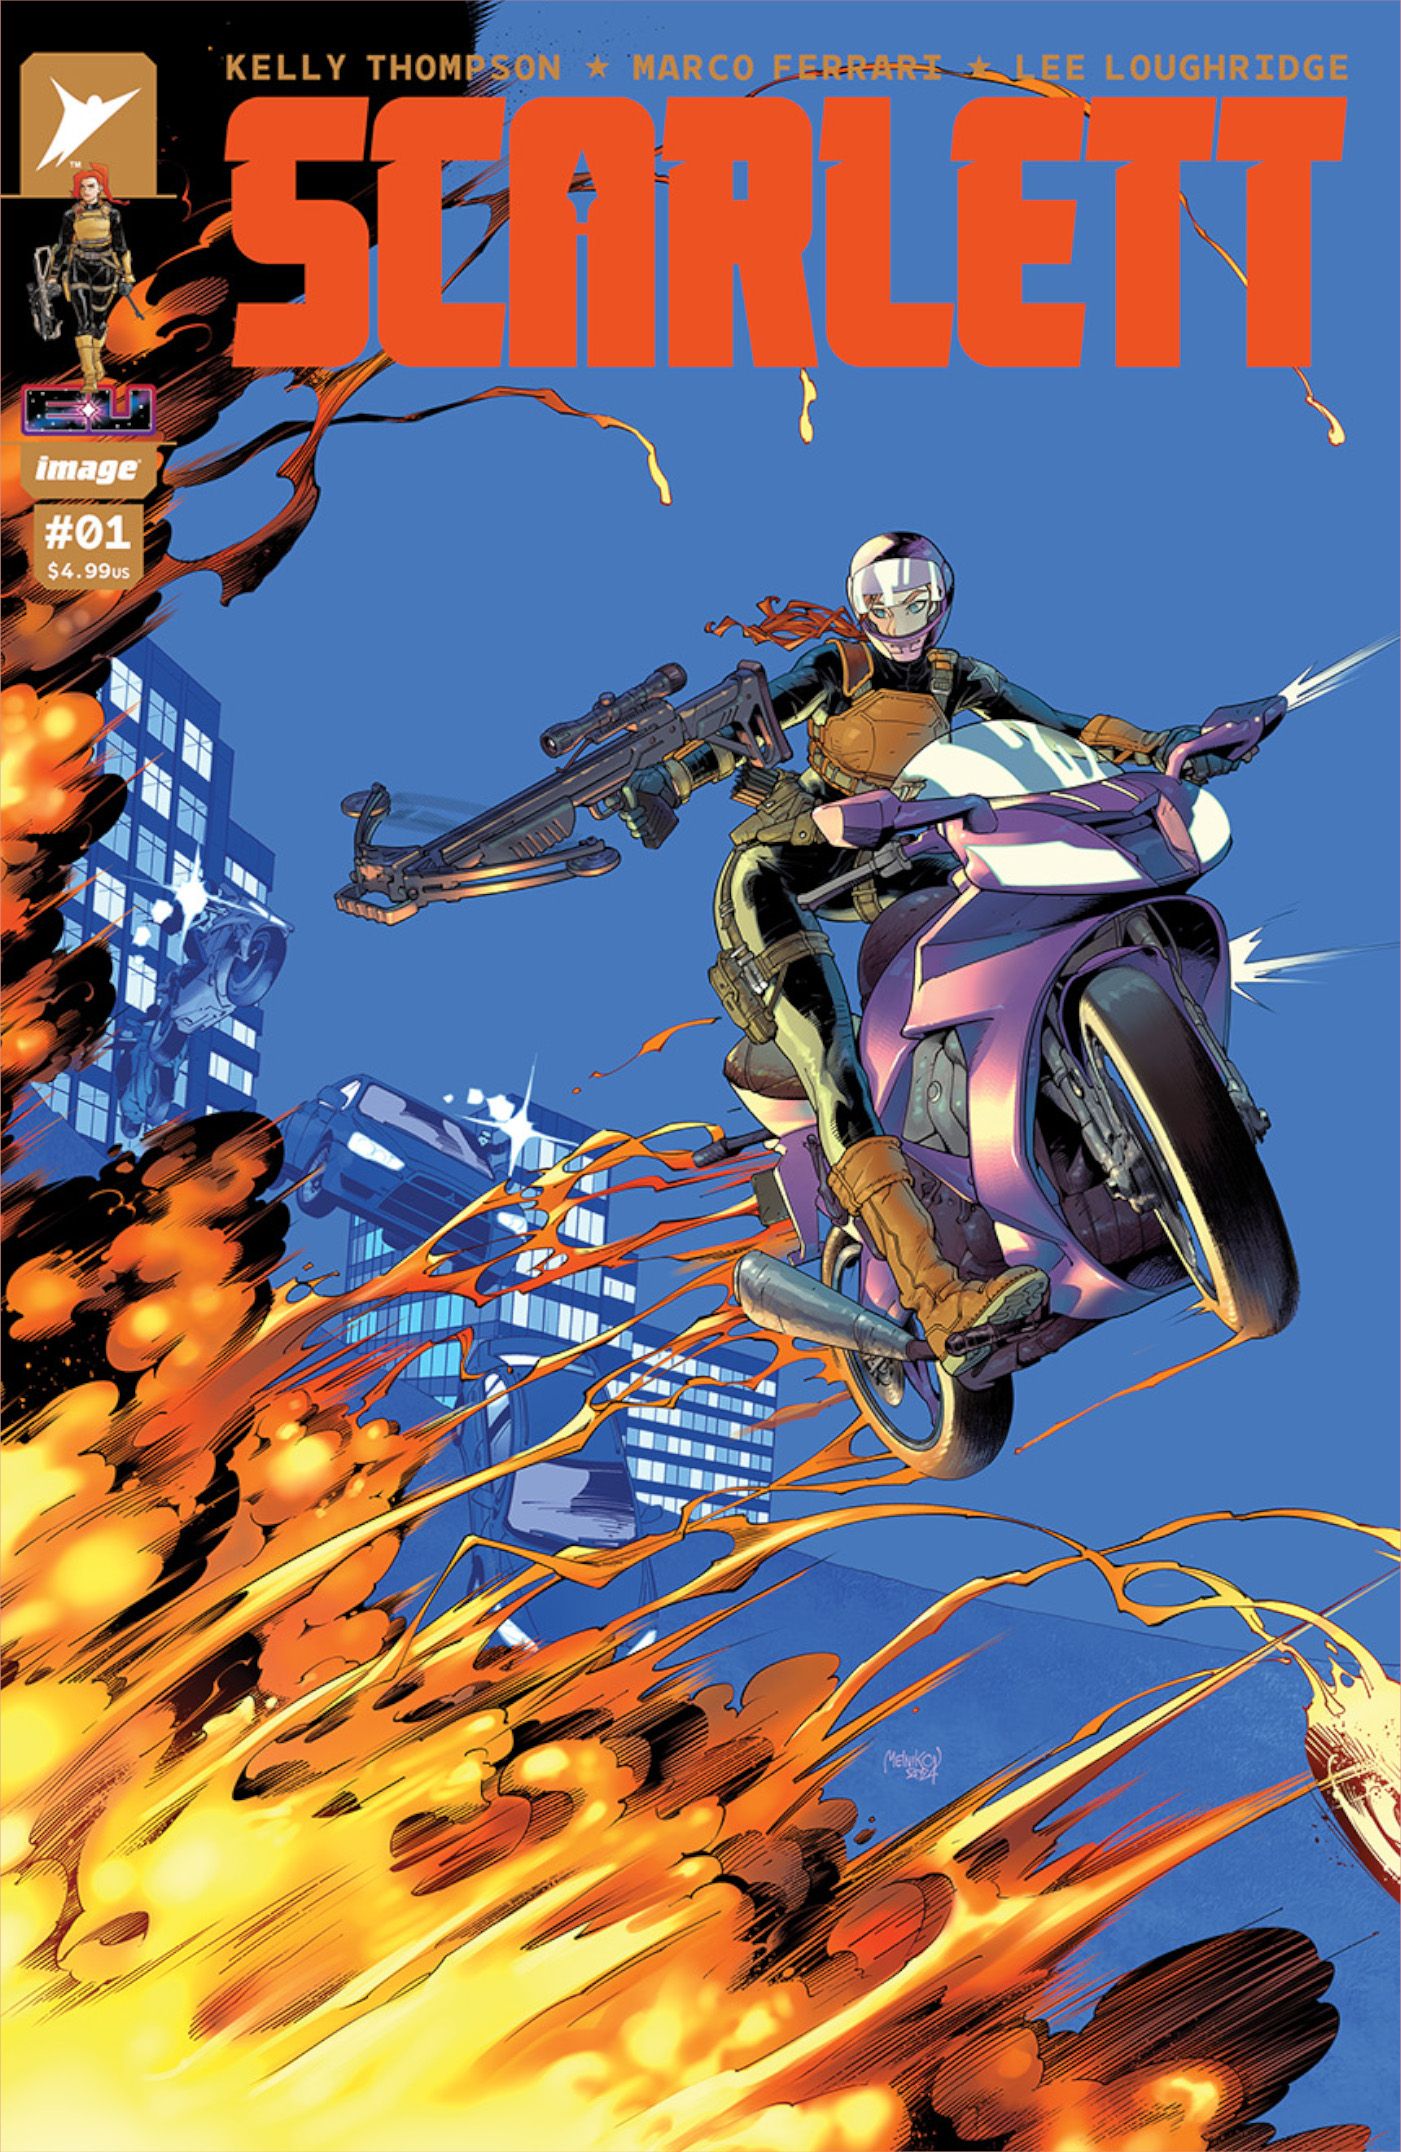 Scarlett #1 cover, Scarlett jumping a motorcycle out of a fiery explosion, pointing her gun in the fire's direction.